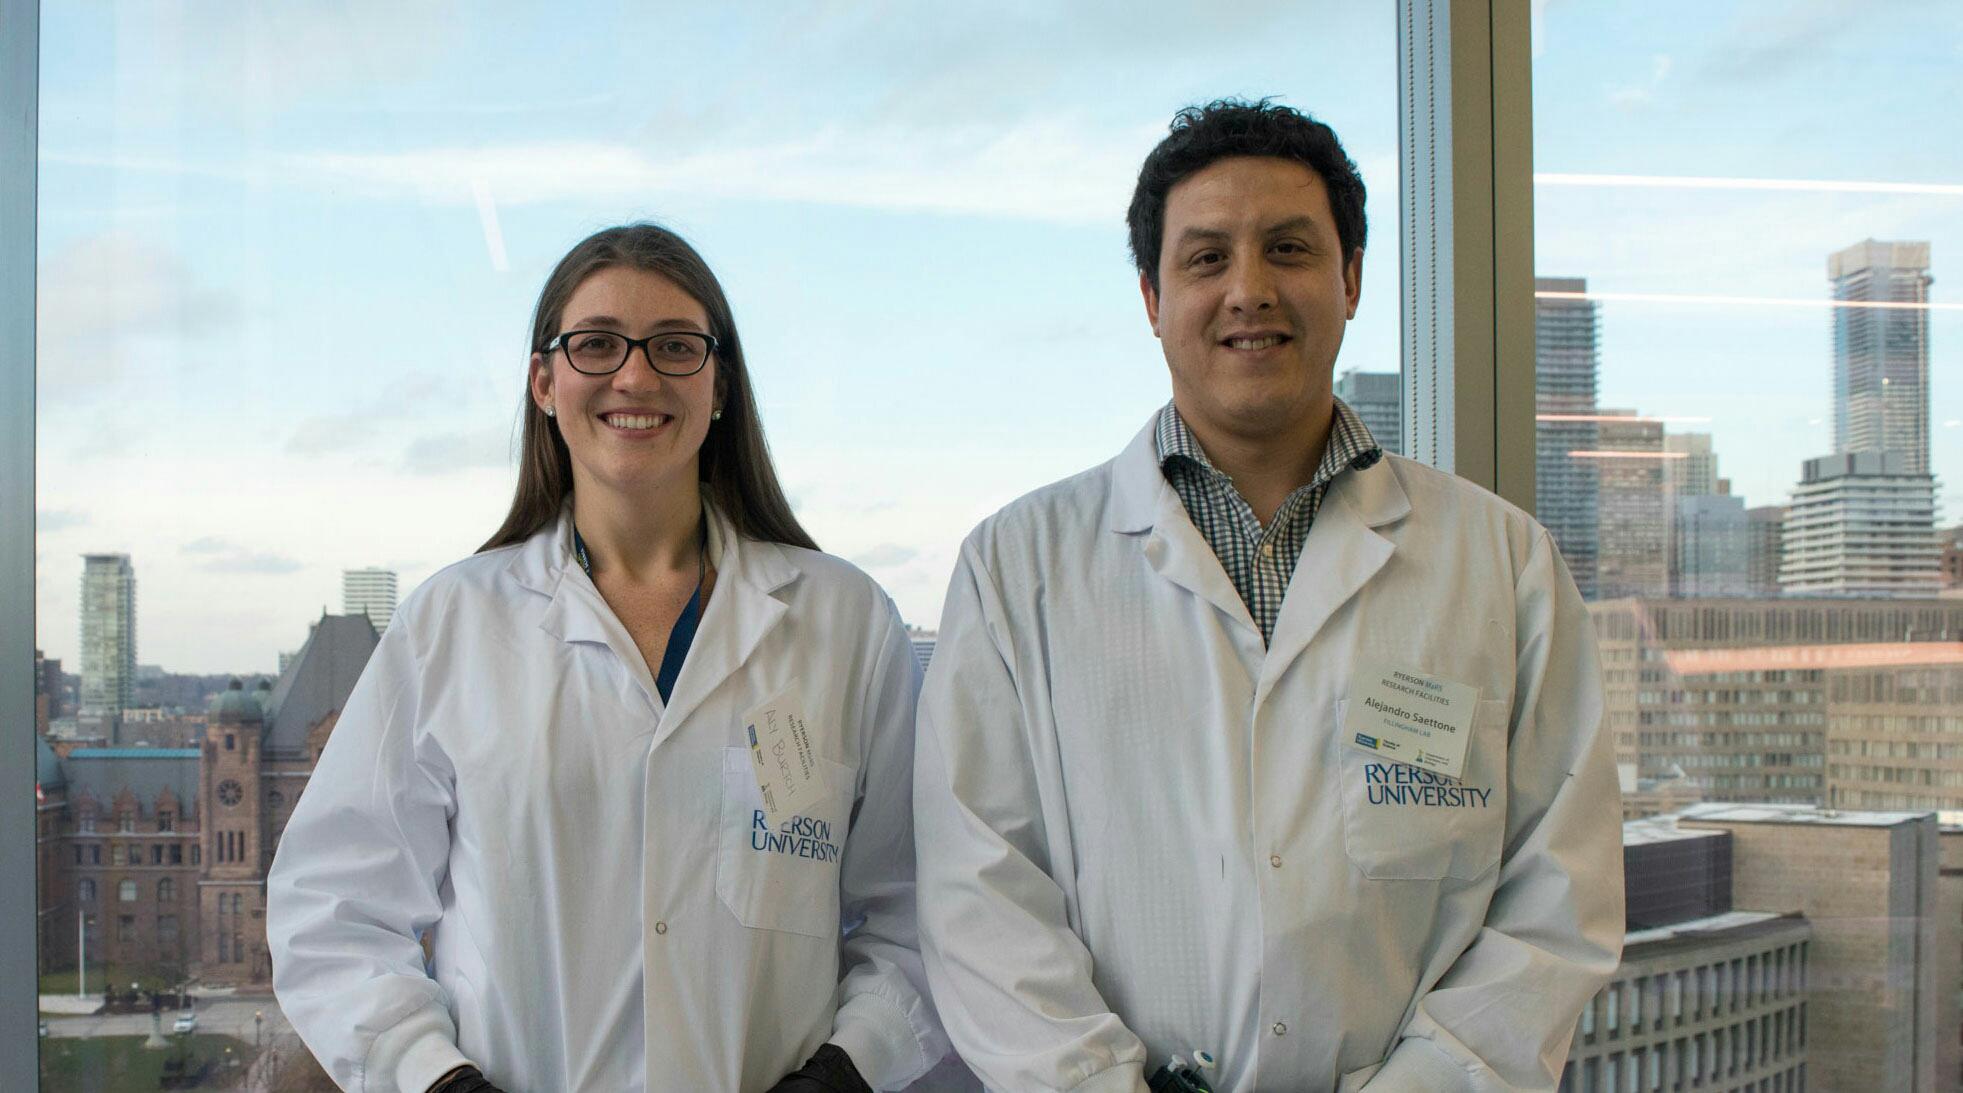 Aly Burtch and Alejandro Saettone wear lab coats and stand side-by-side in front of a window.